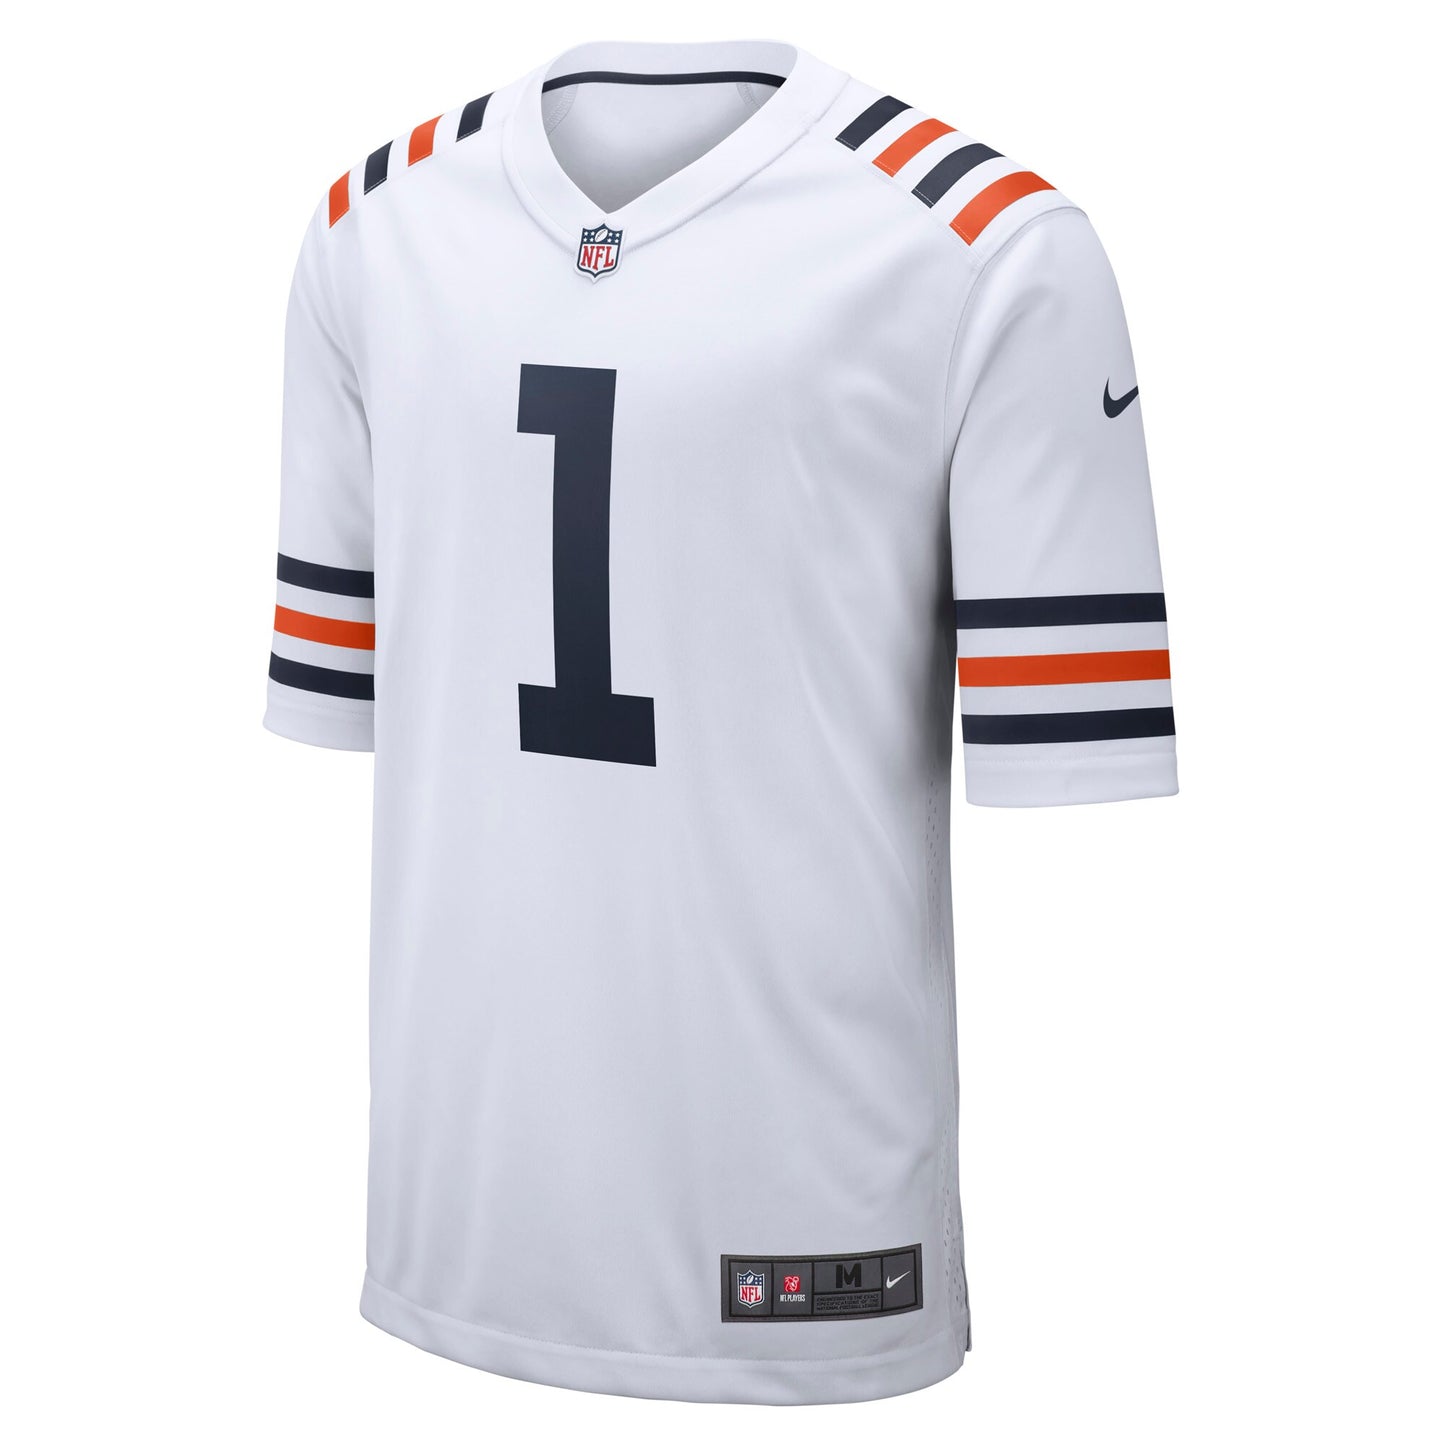 Justin Fields Chicago Bears Nike White Color Rush Alternate Replica Jersey - Youth